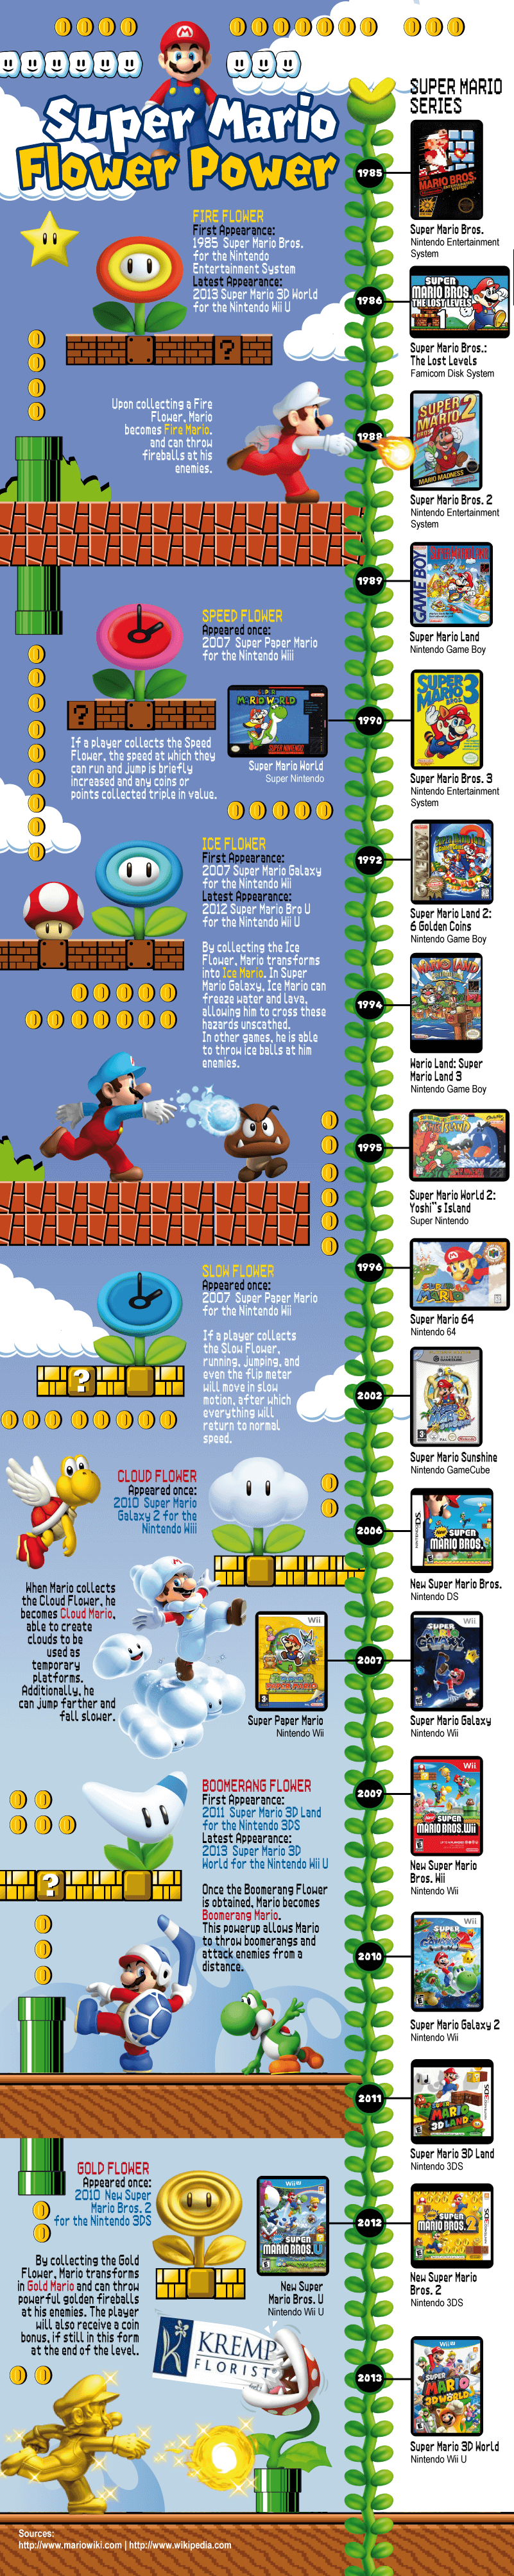 all mario brothers